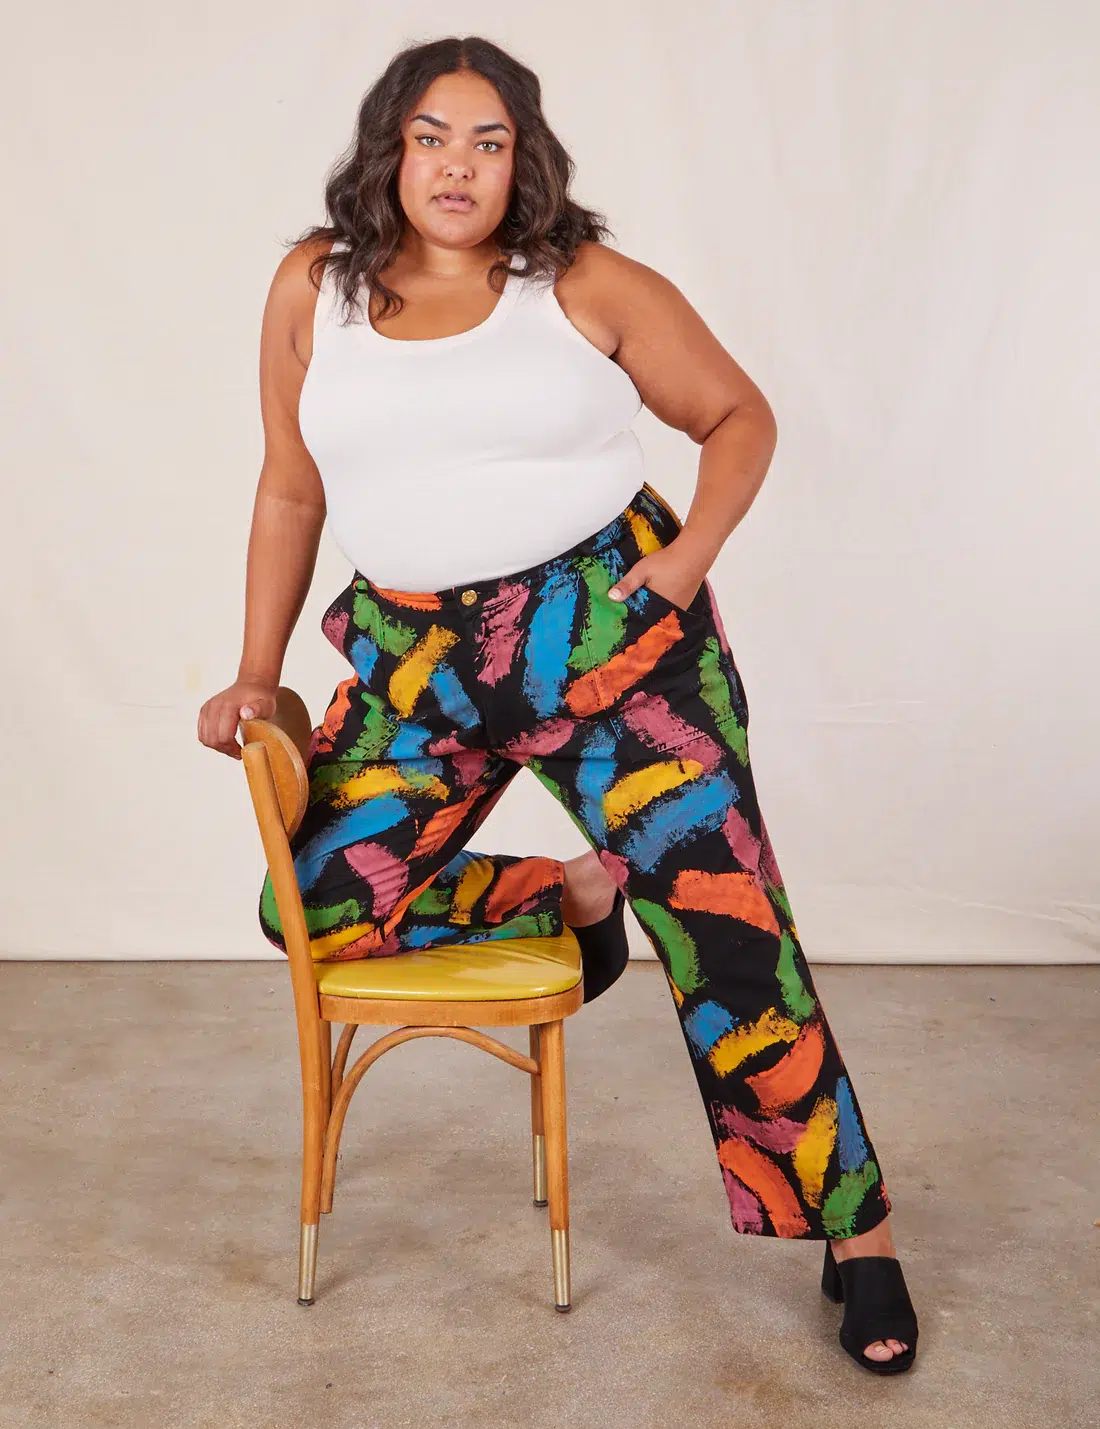 A plus size model in a white tank and black pants with colorful painted print.